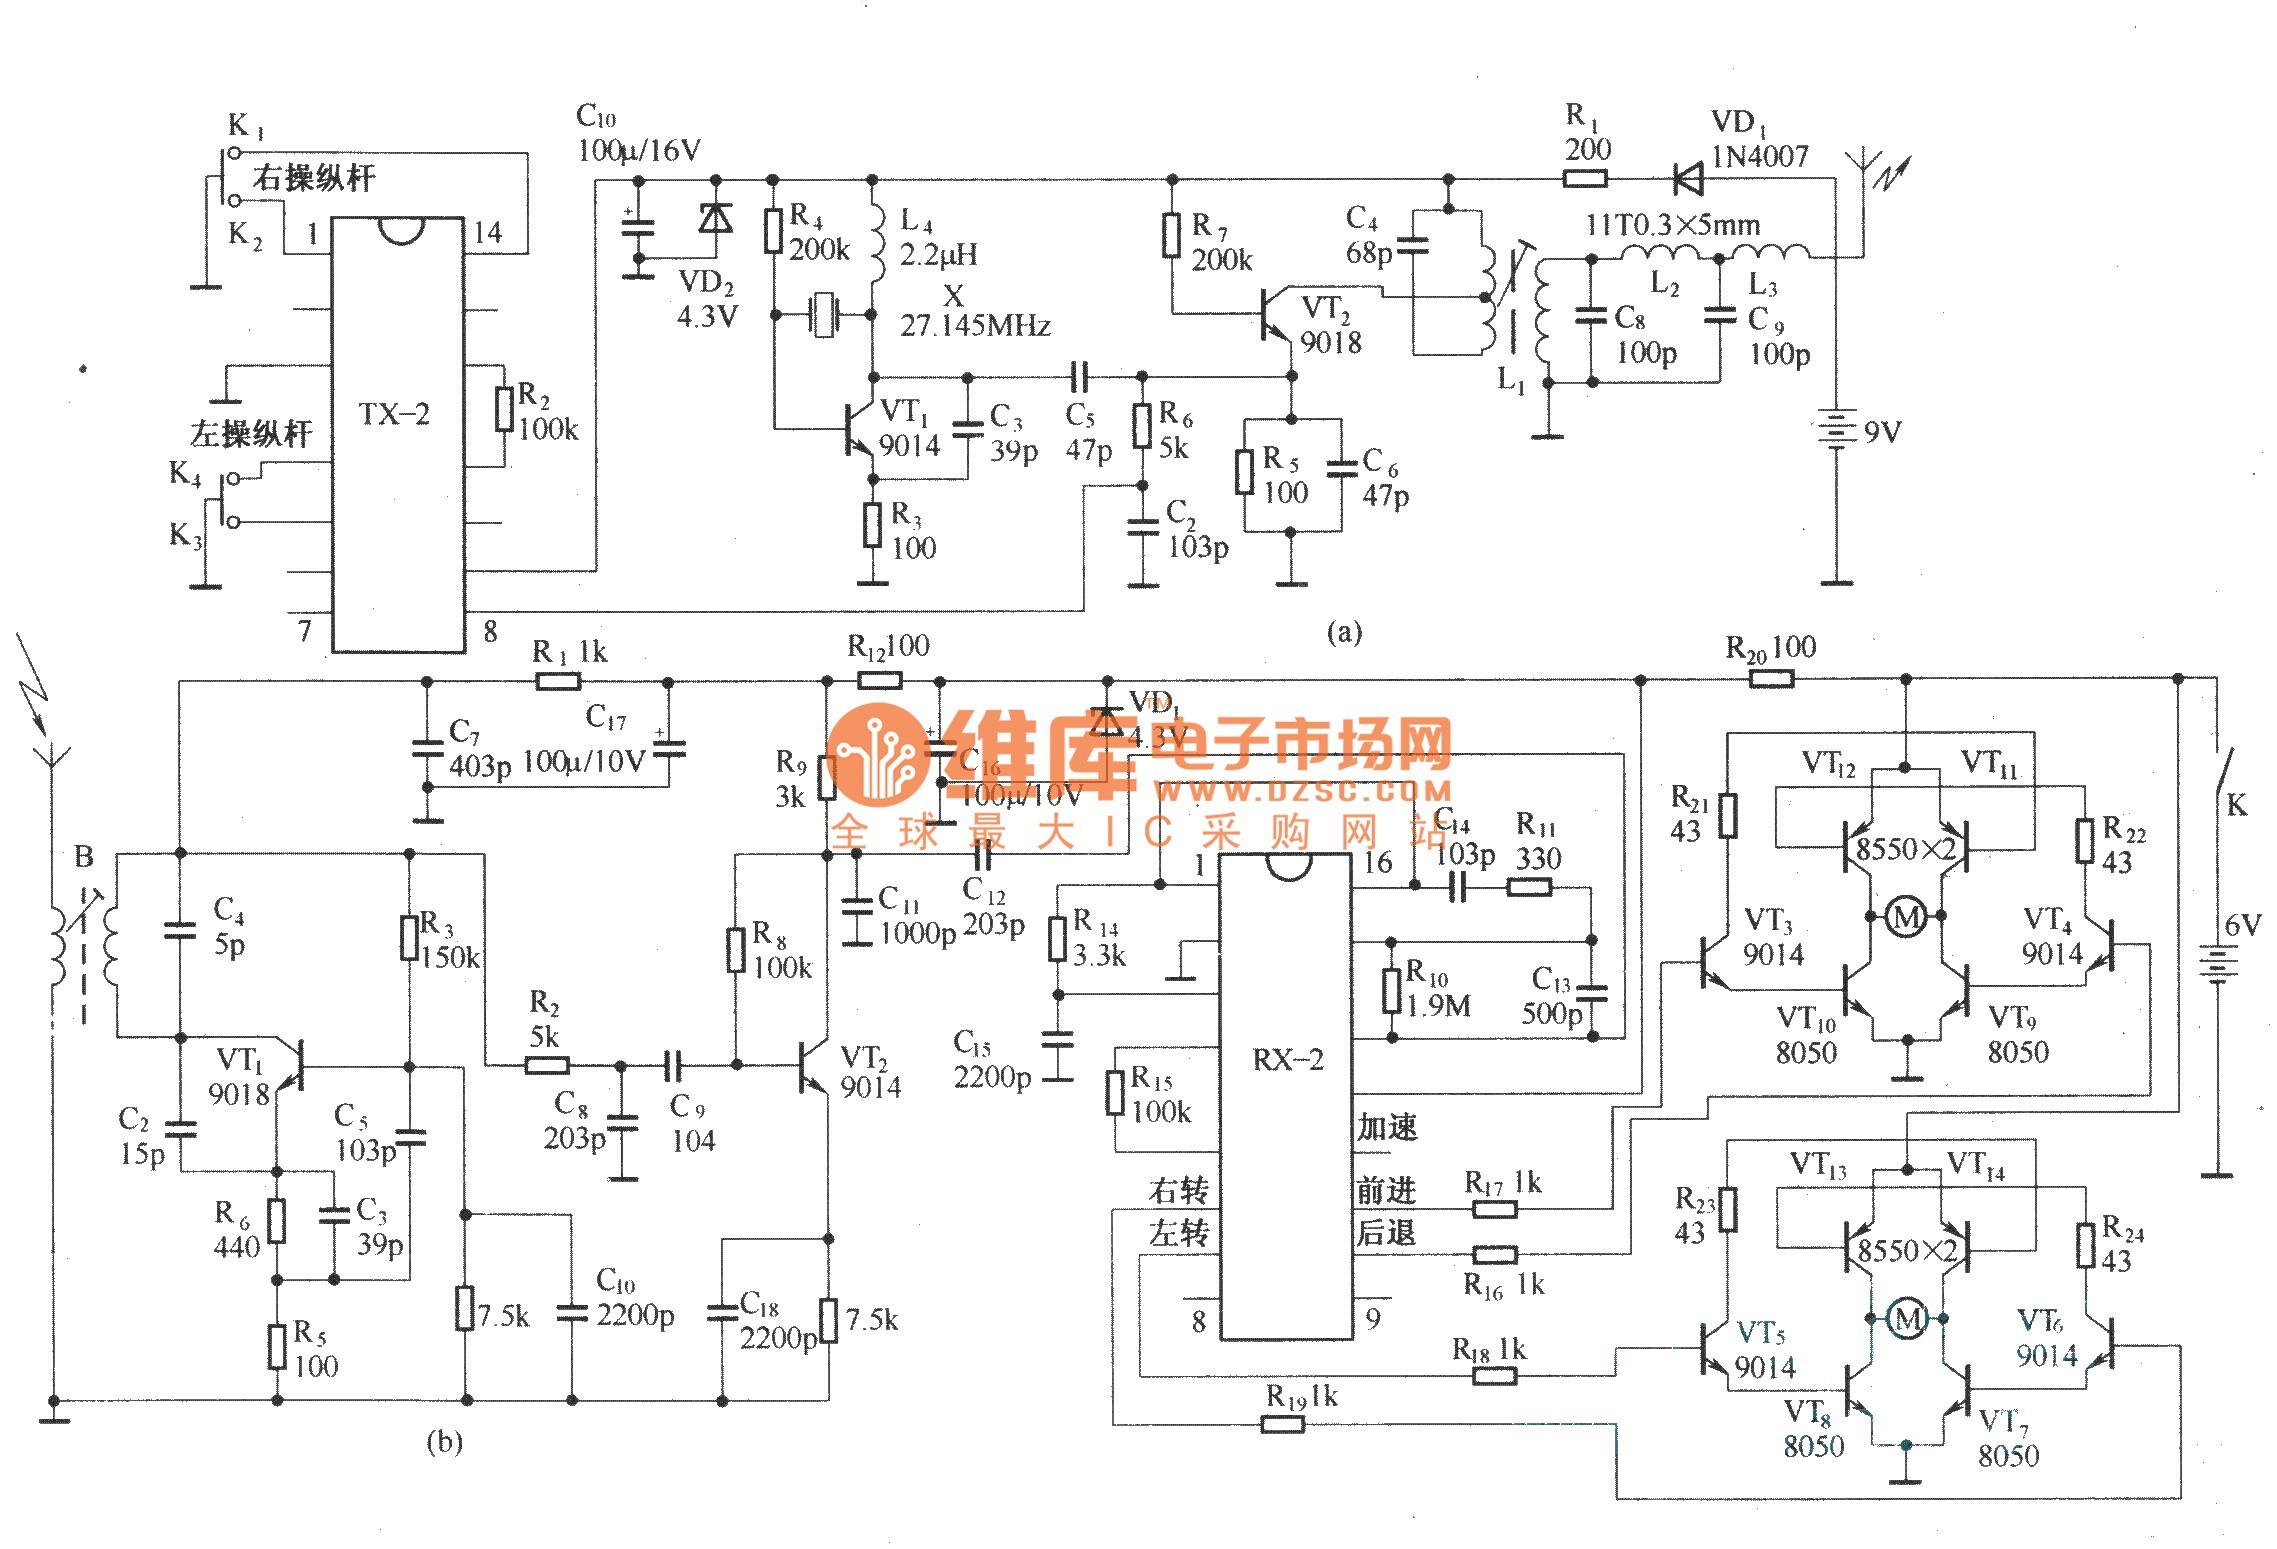 Circuit Diagram Of Remote Control Car Car Diagram Remotetoycarassembly Make Remote Controlled toy Car Of Circuit Diagram Of Remote Control Car